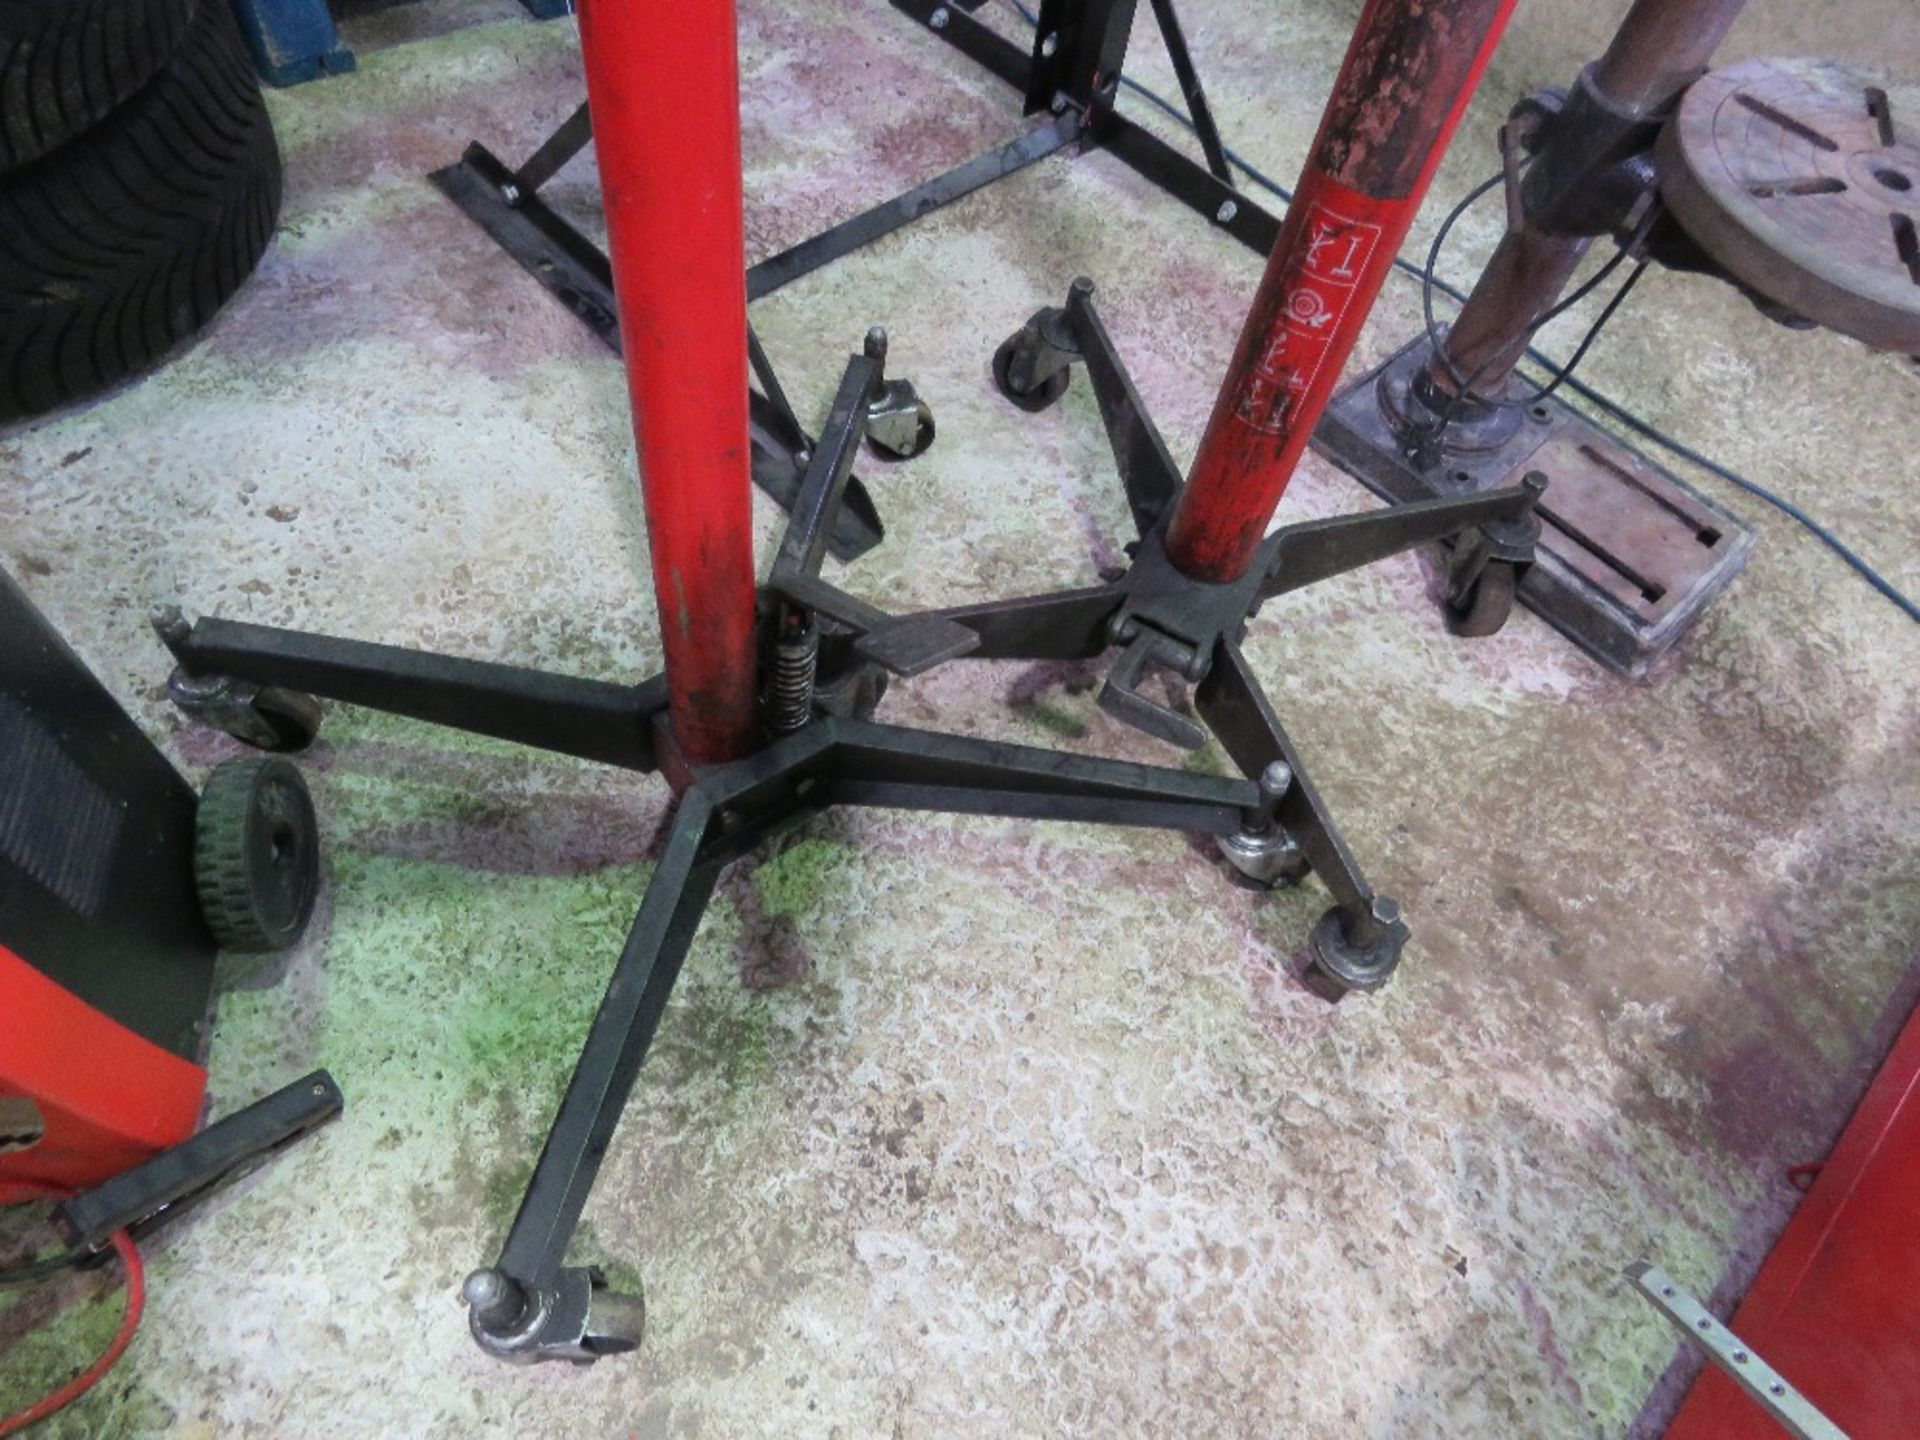 2 X HYDRAULIC FOOT OPERATED TRANSMISSION JACKS. SOURCED FROM GARAGE COMPANY LIQUIDATION. - Image 2 of 4